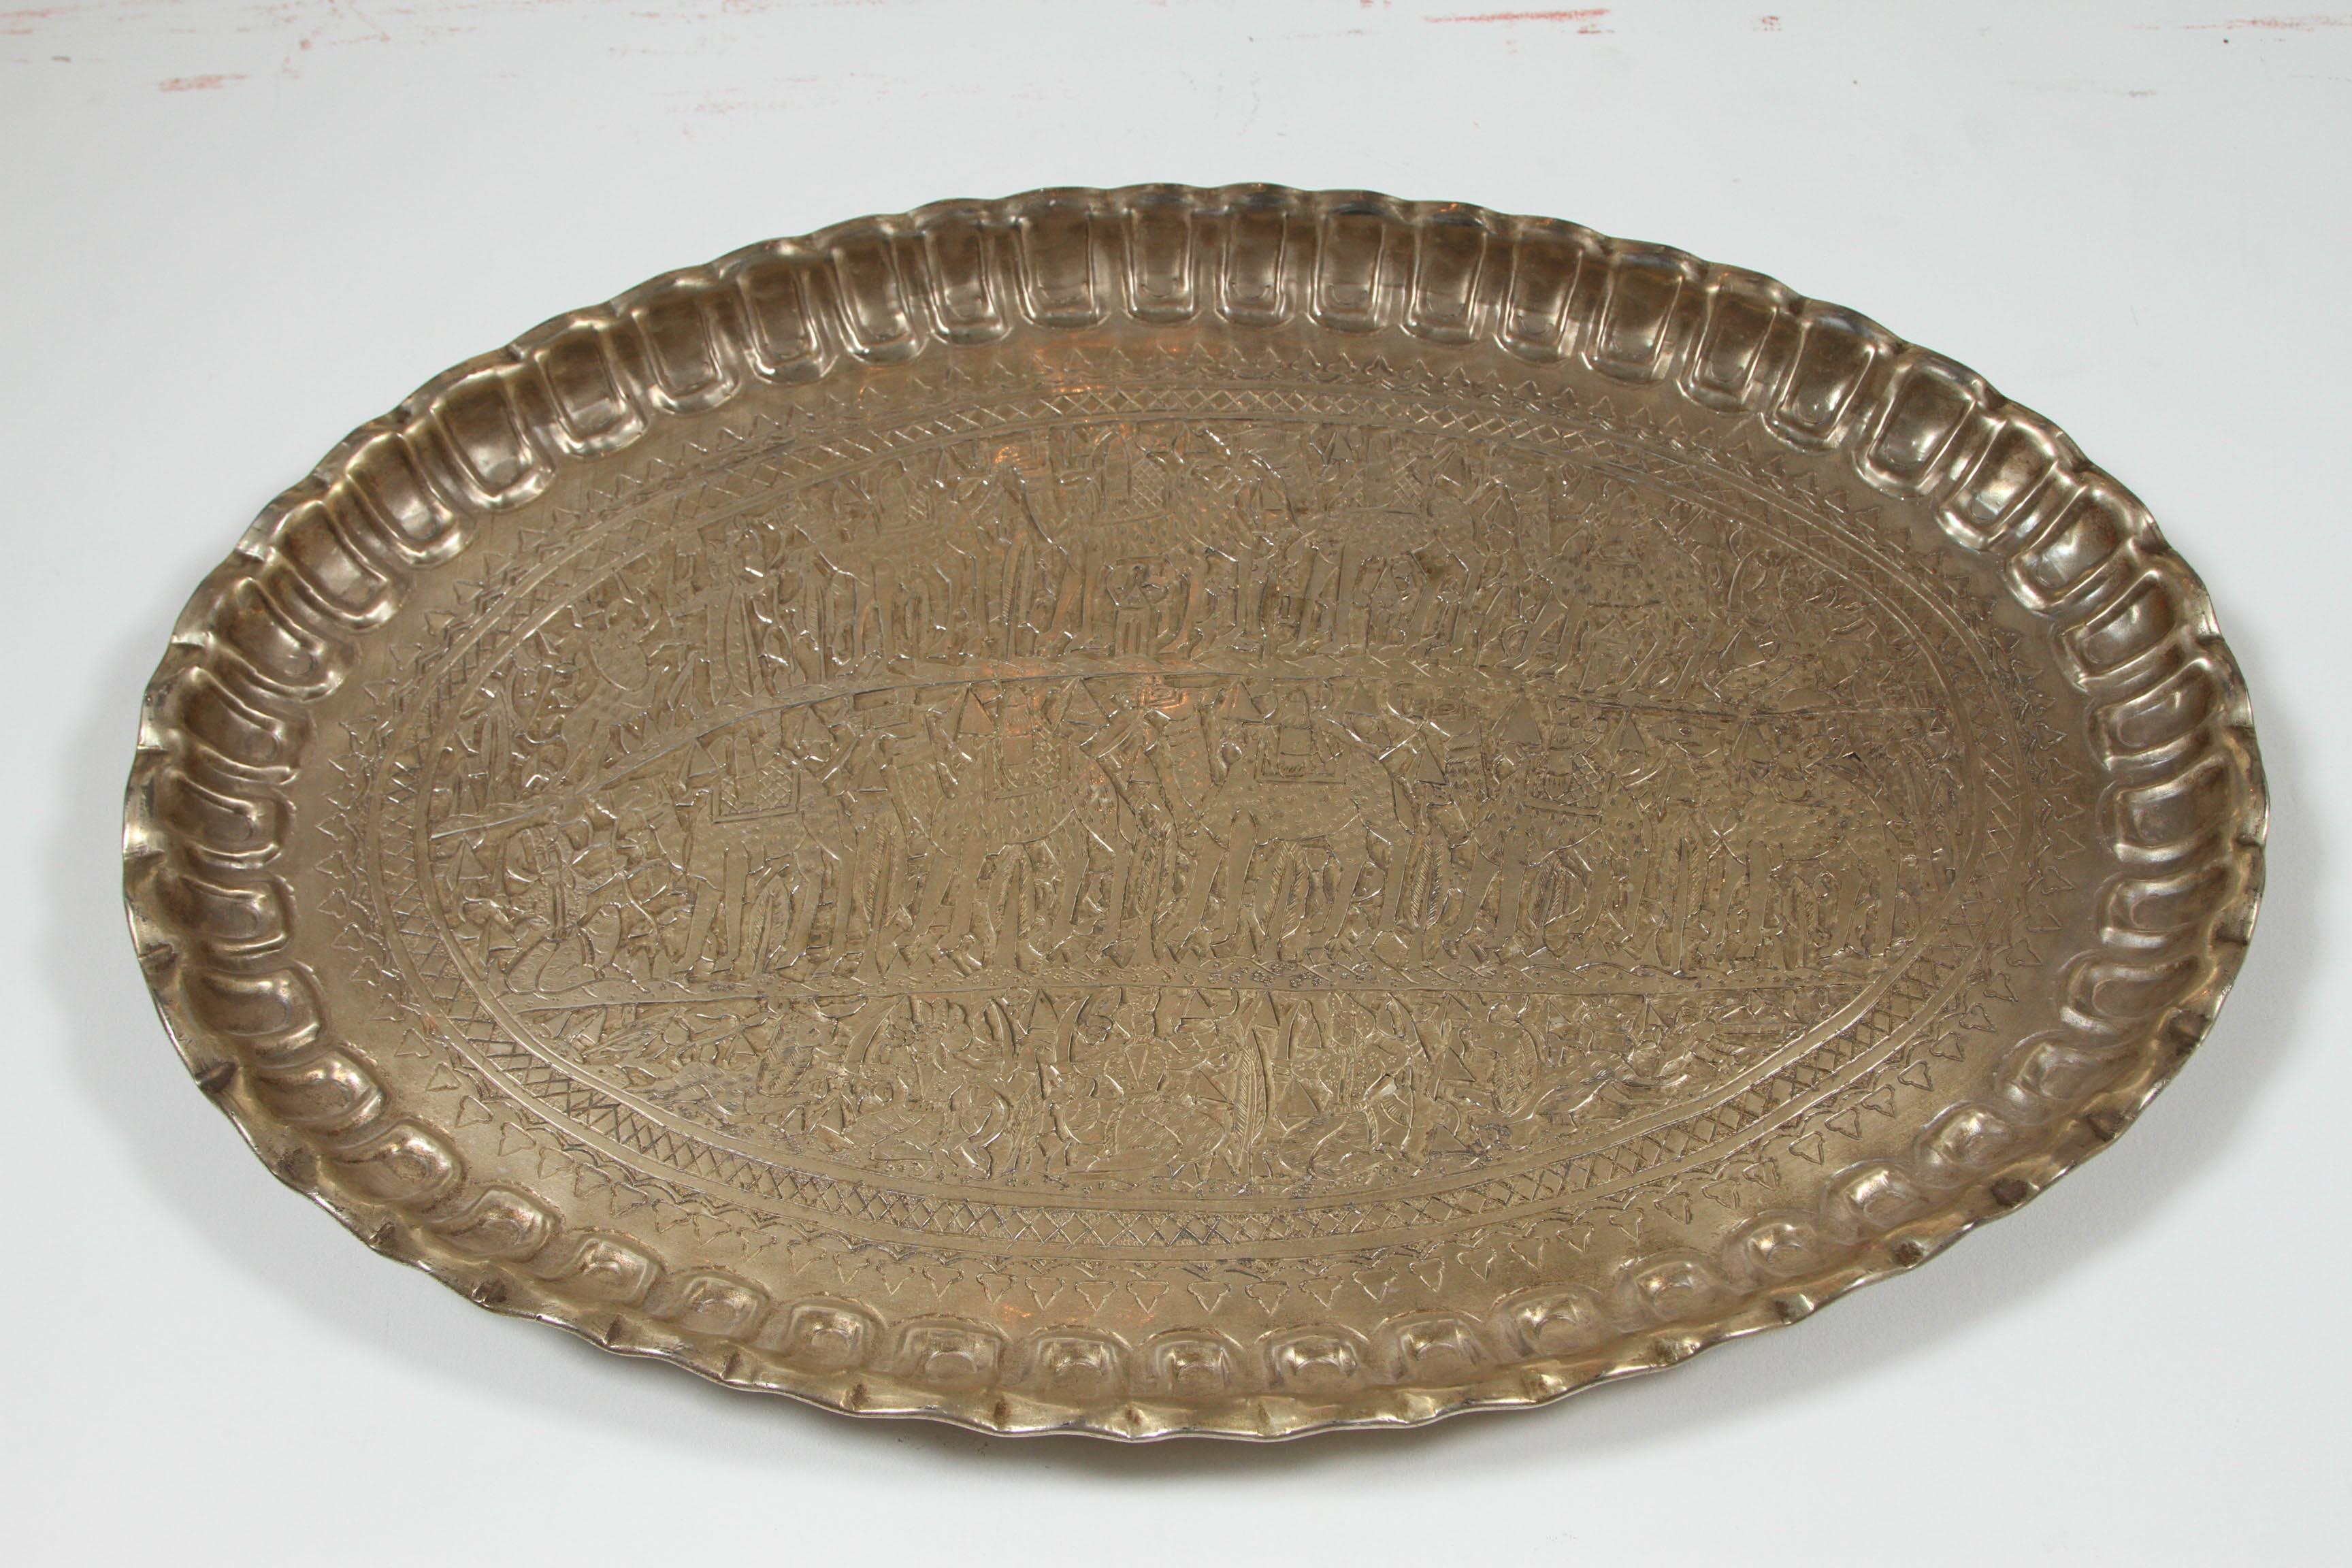 Antique Middle Eastern Egyptian wall hanging charger tray.
Silver color metal with pictural scene of figures, camel, lions and pyramids.
Pie crust with geometric Moorish design, Museum quality piece.
Nicely handcrafted and hand-carved with floral